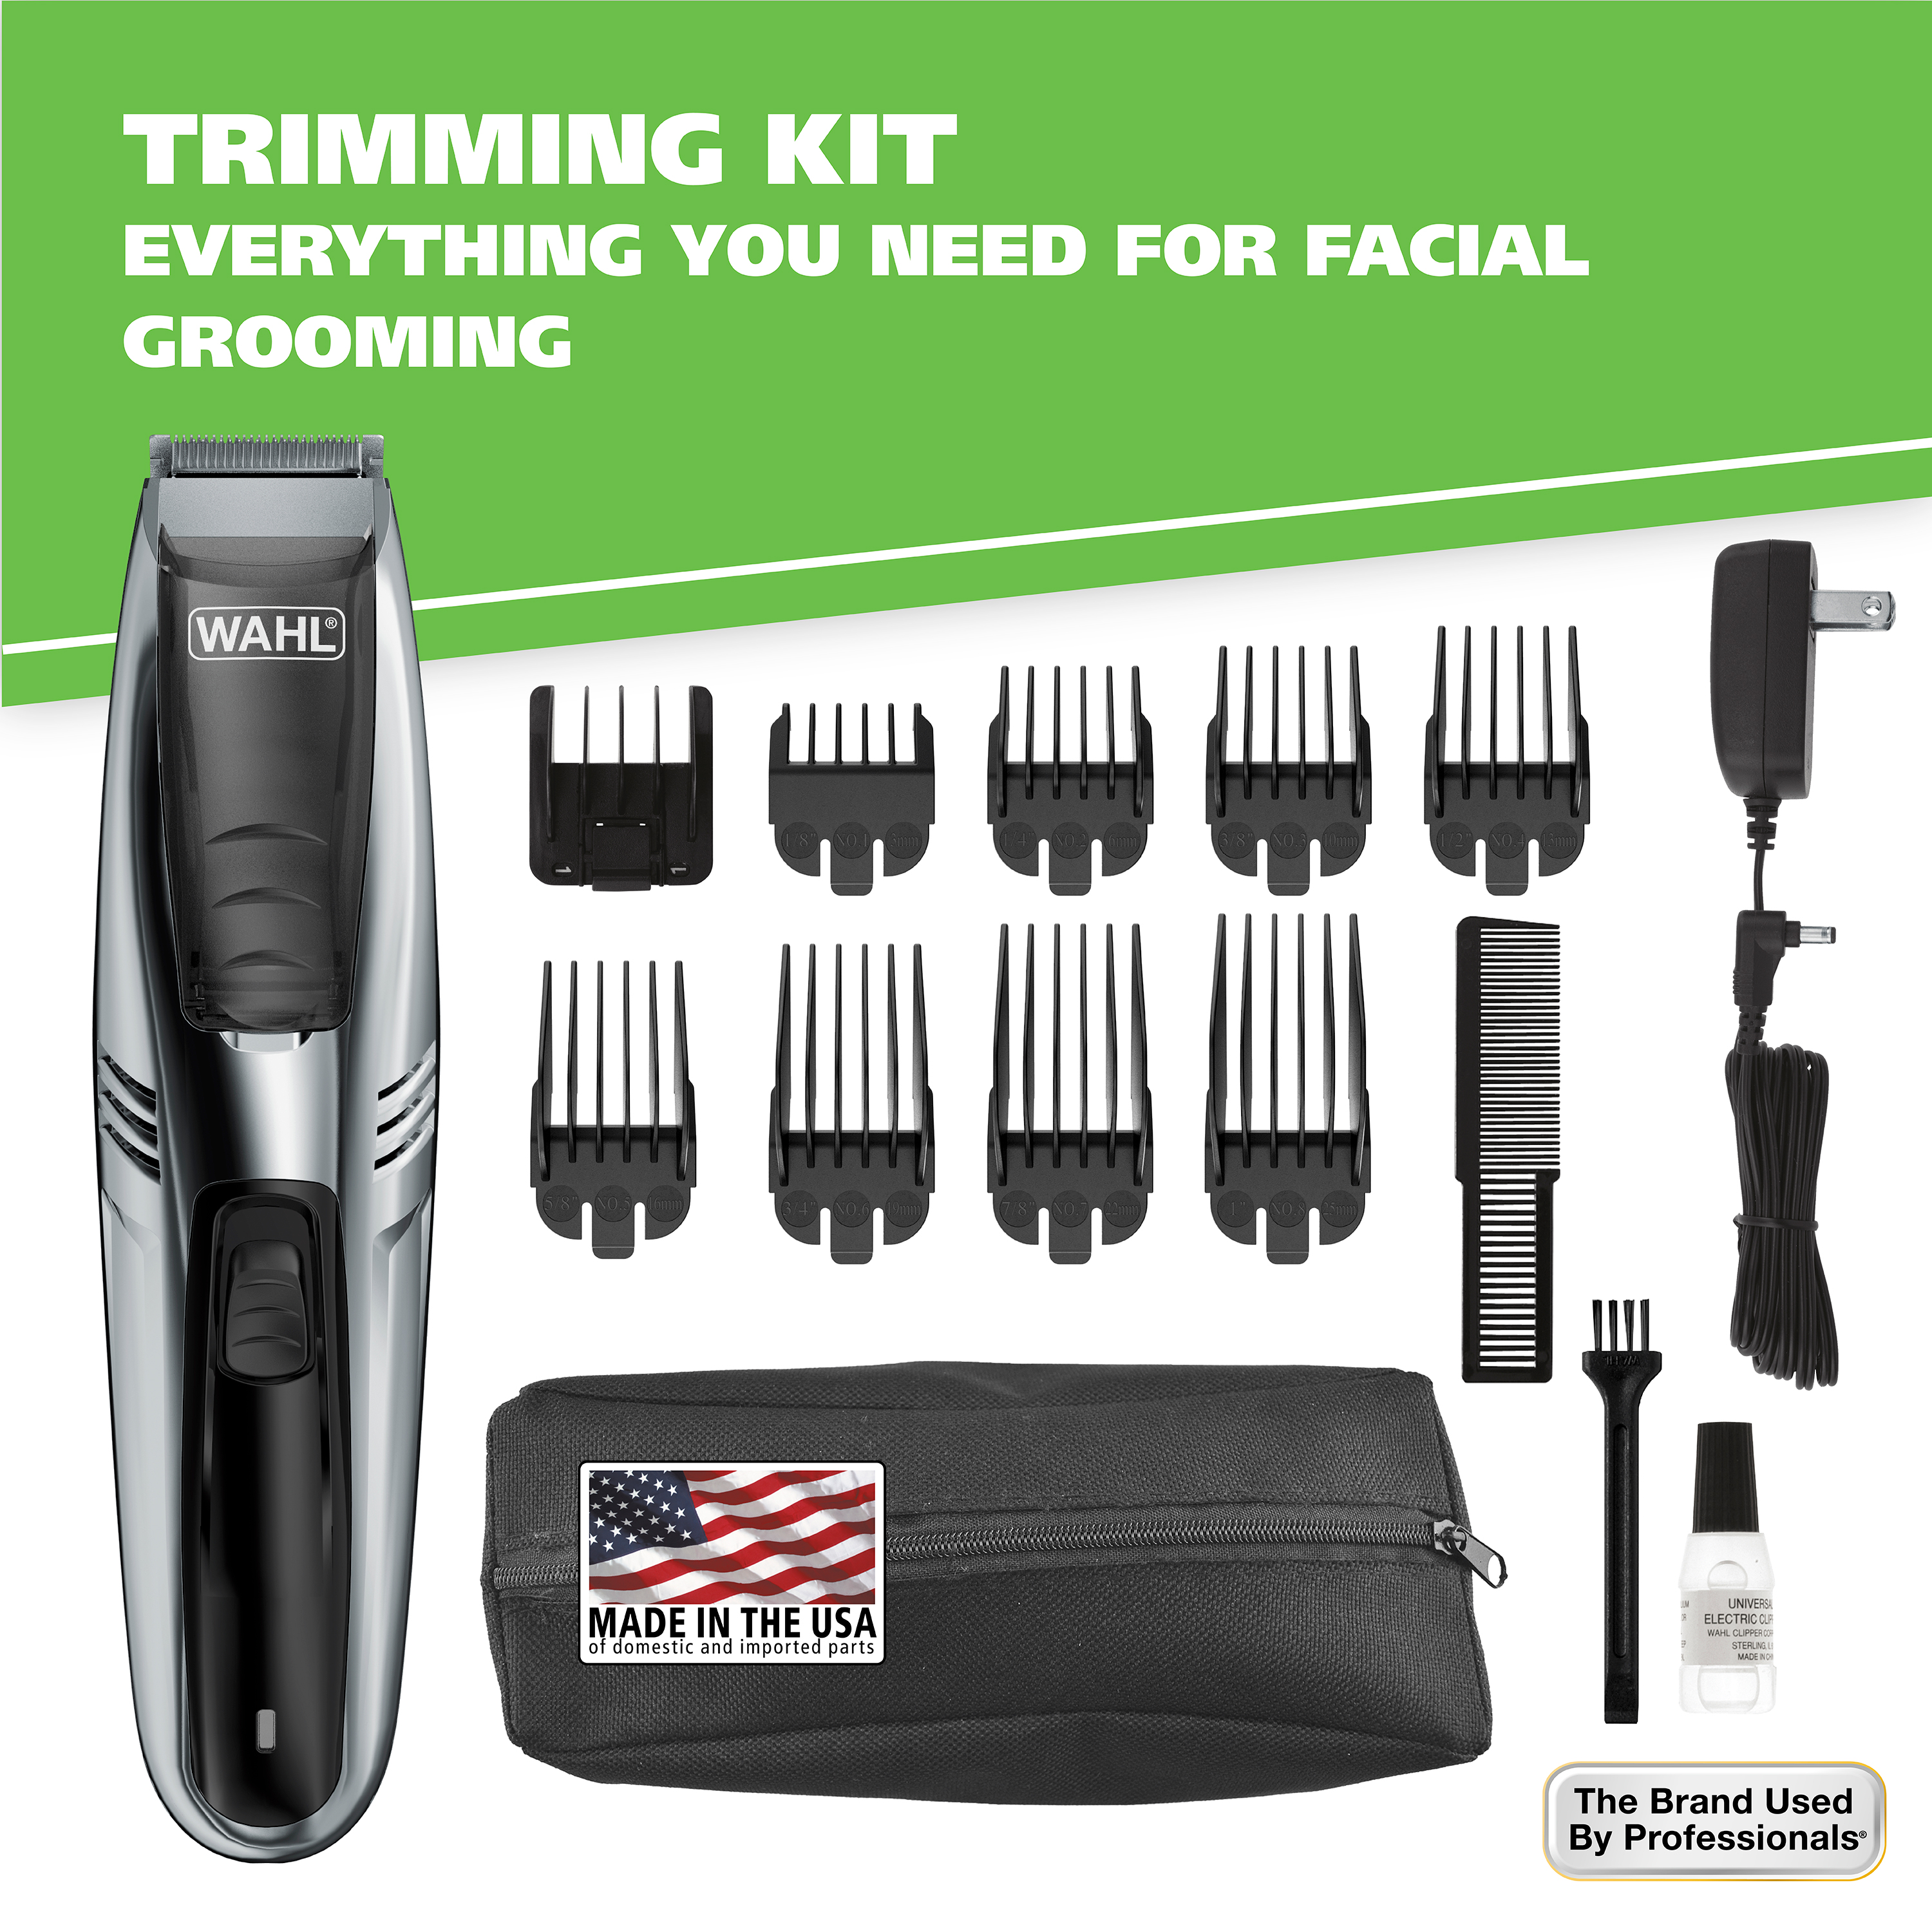 Wahl Lithium Ion Vacuum Trimmer Kit with Adjustable Vacuum Intake - Model #9870 - image 2 of 10